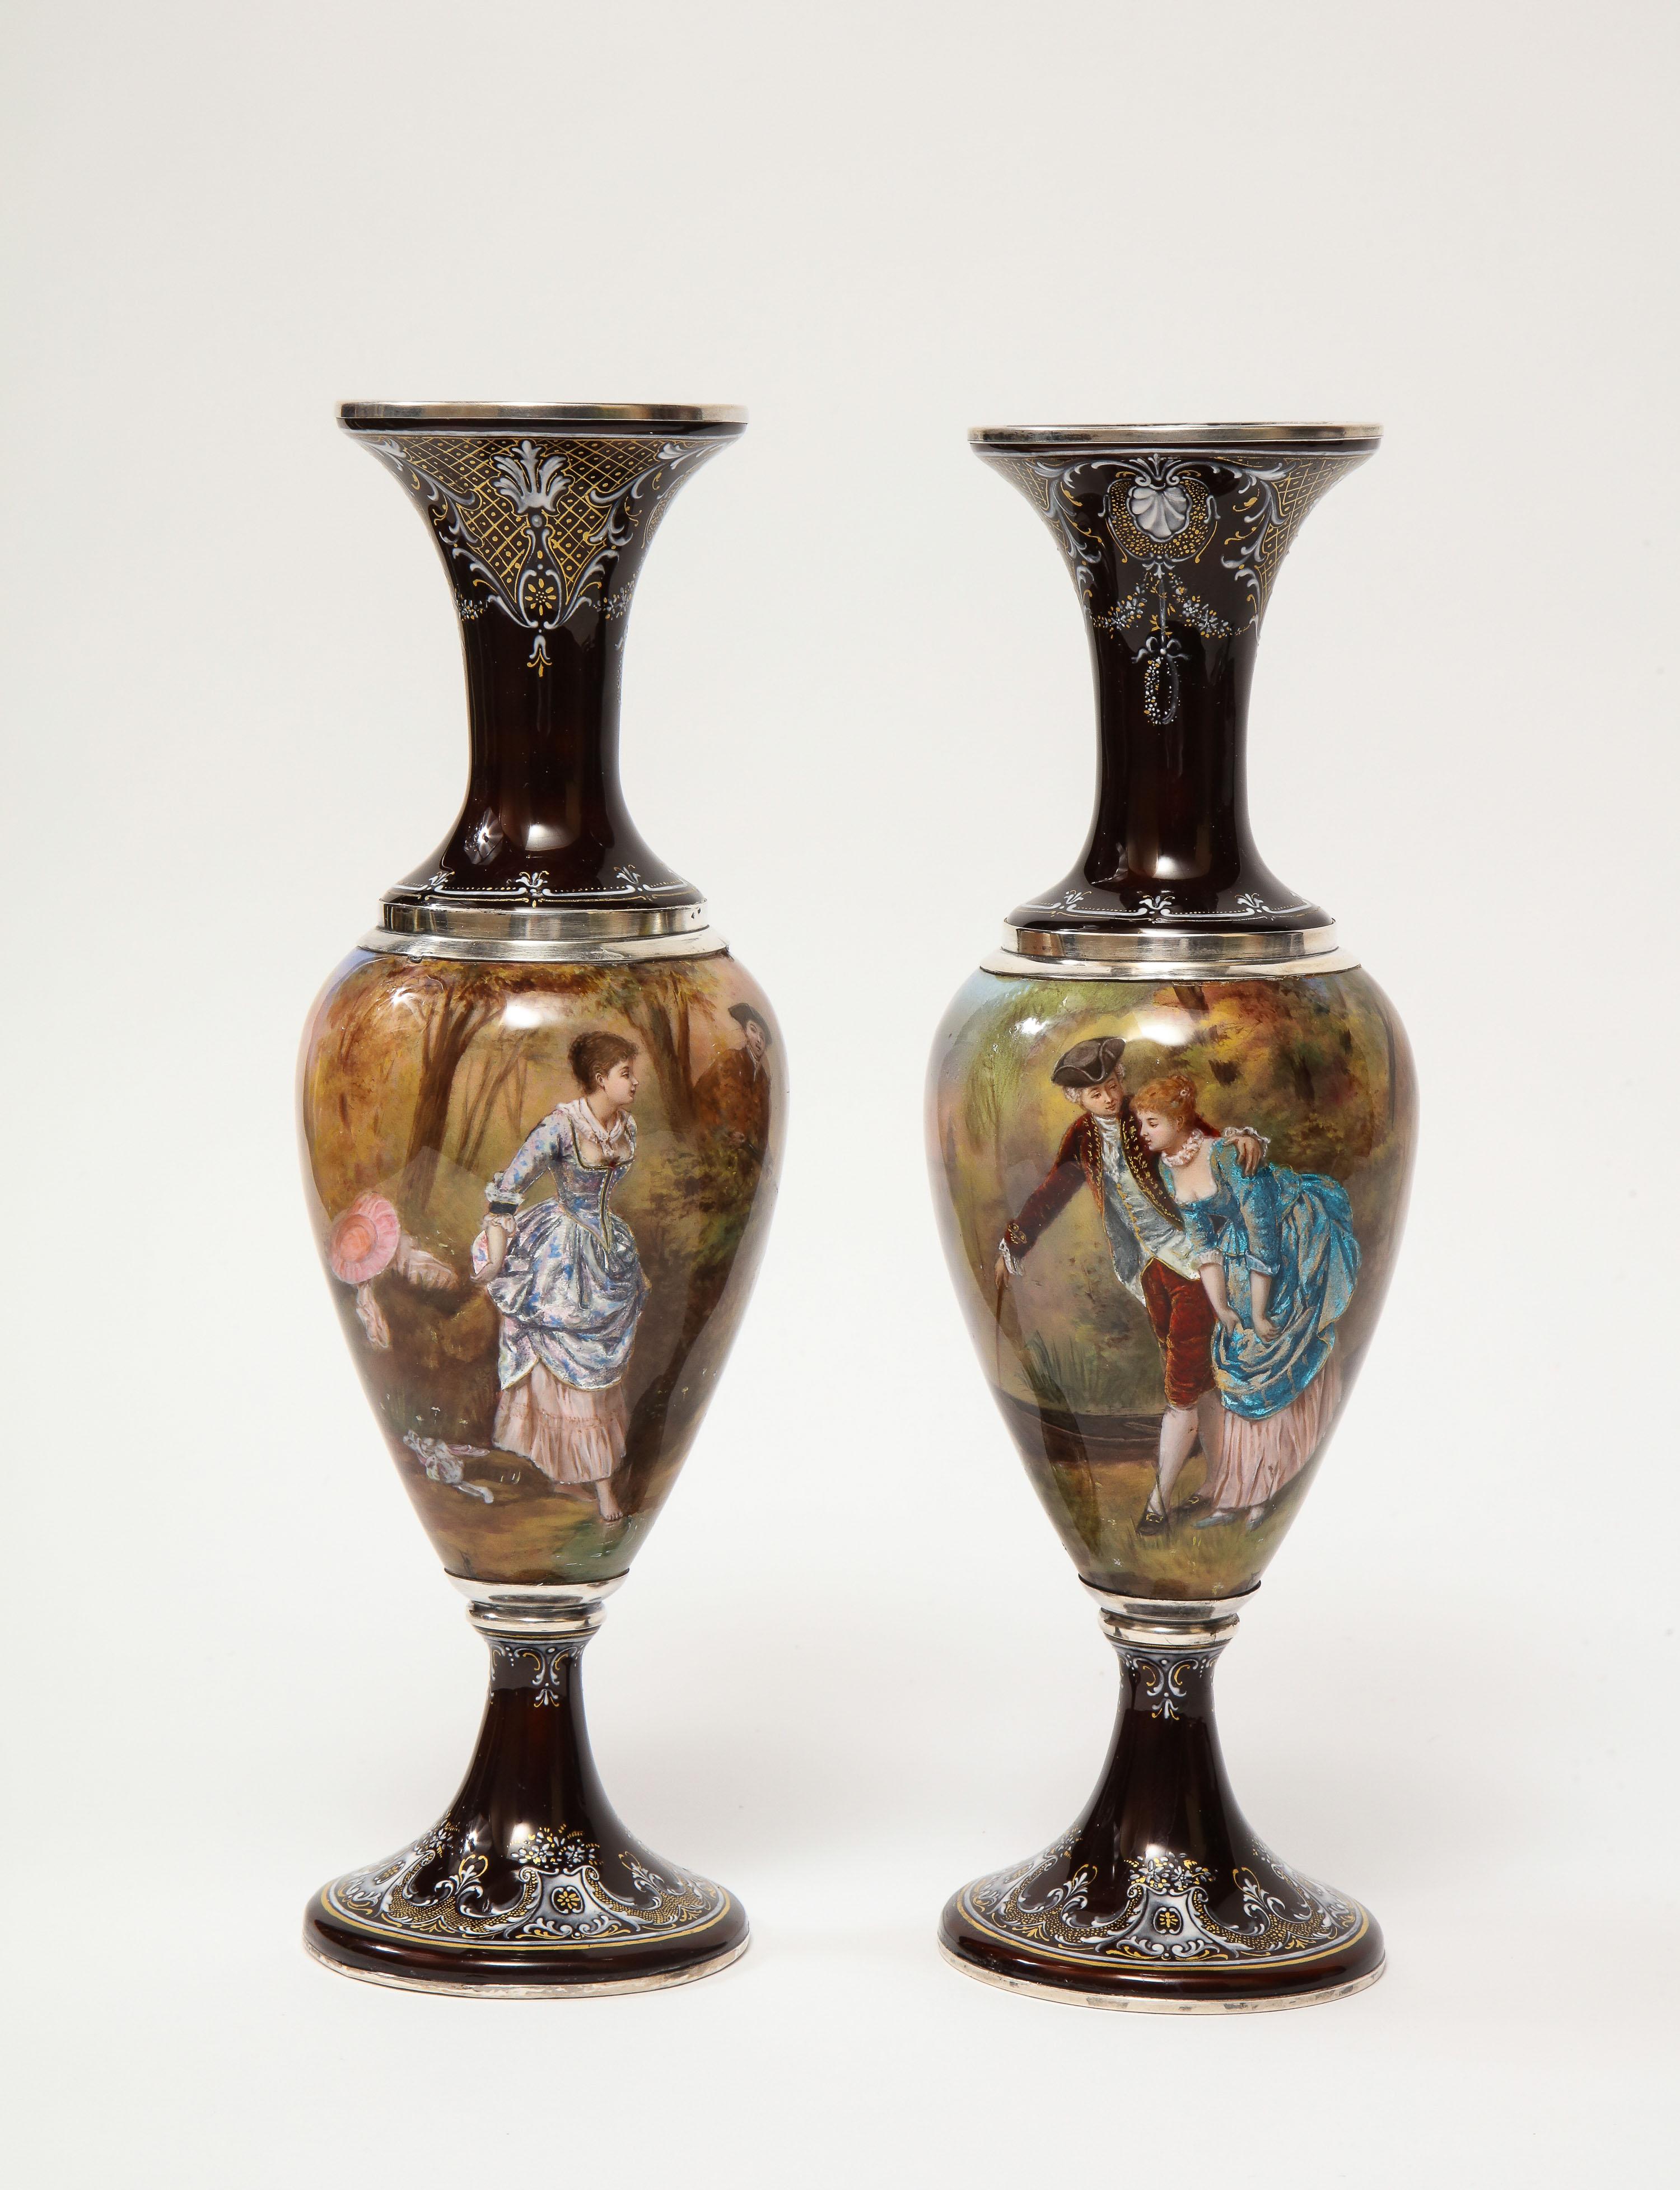 A pair of French silver & Limoges enamel vases, retailed by Tiffany & Co., 19th century.

The silver mounts with JC hallmarks, for Joseph Cousin, Paris.

The first painted with a couple next to a rowboat with a castle in the distance, the second